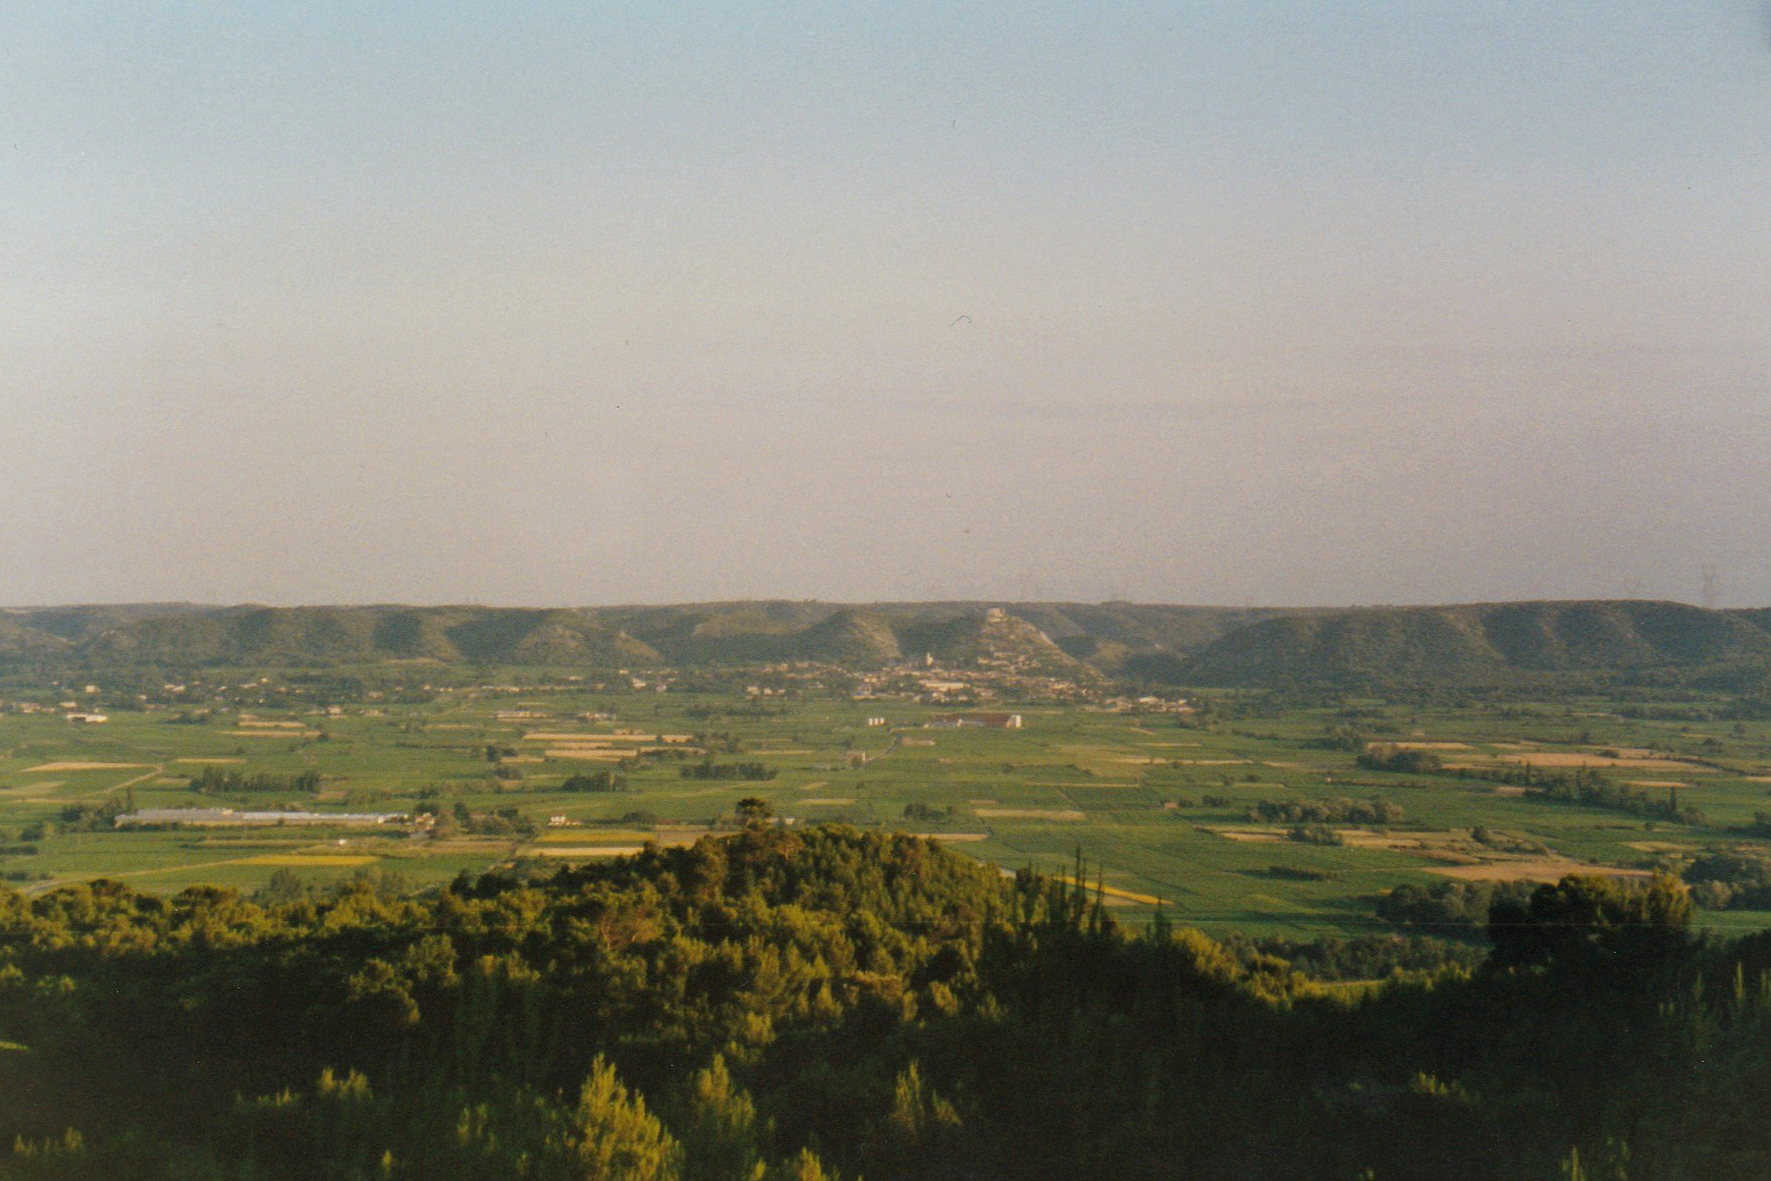 St Victor la Coste to the south with its castle ruins